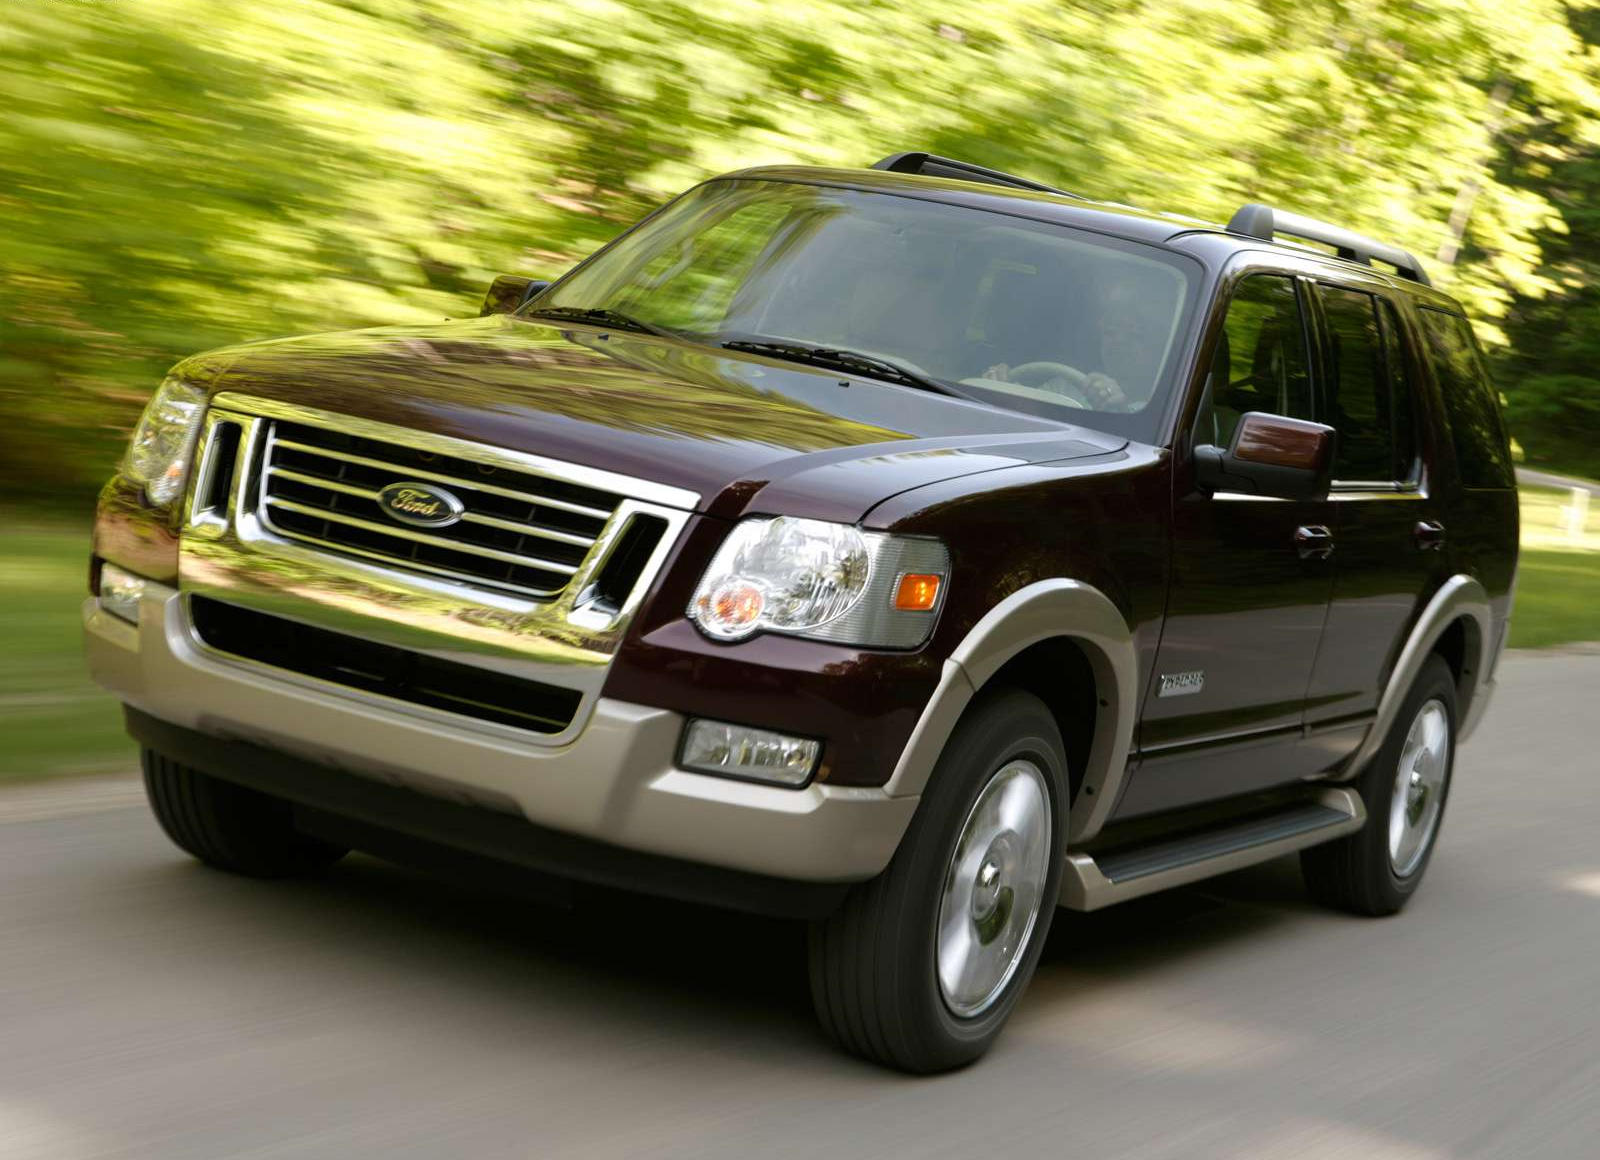 2008 Ford Explorer Front View Driving